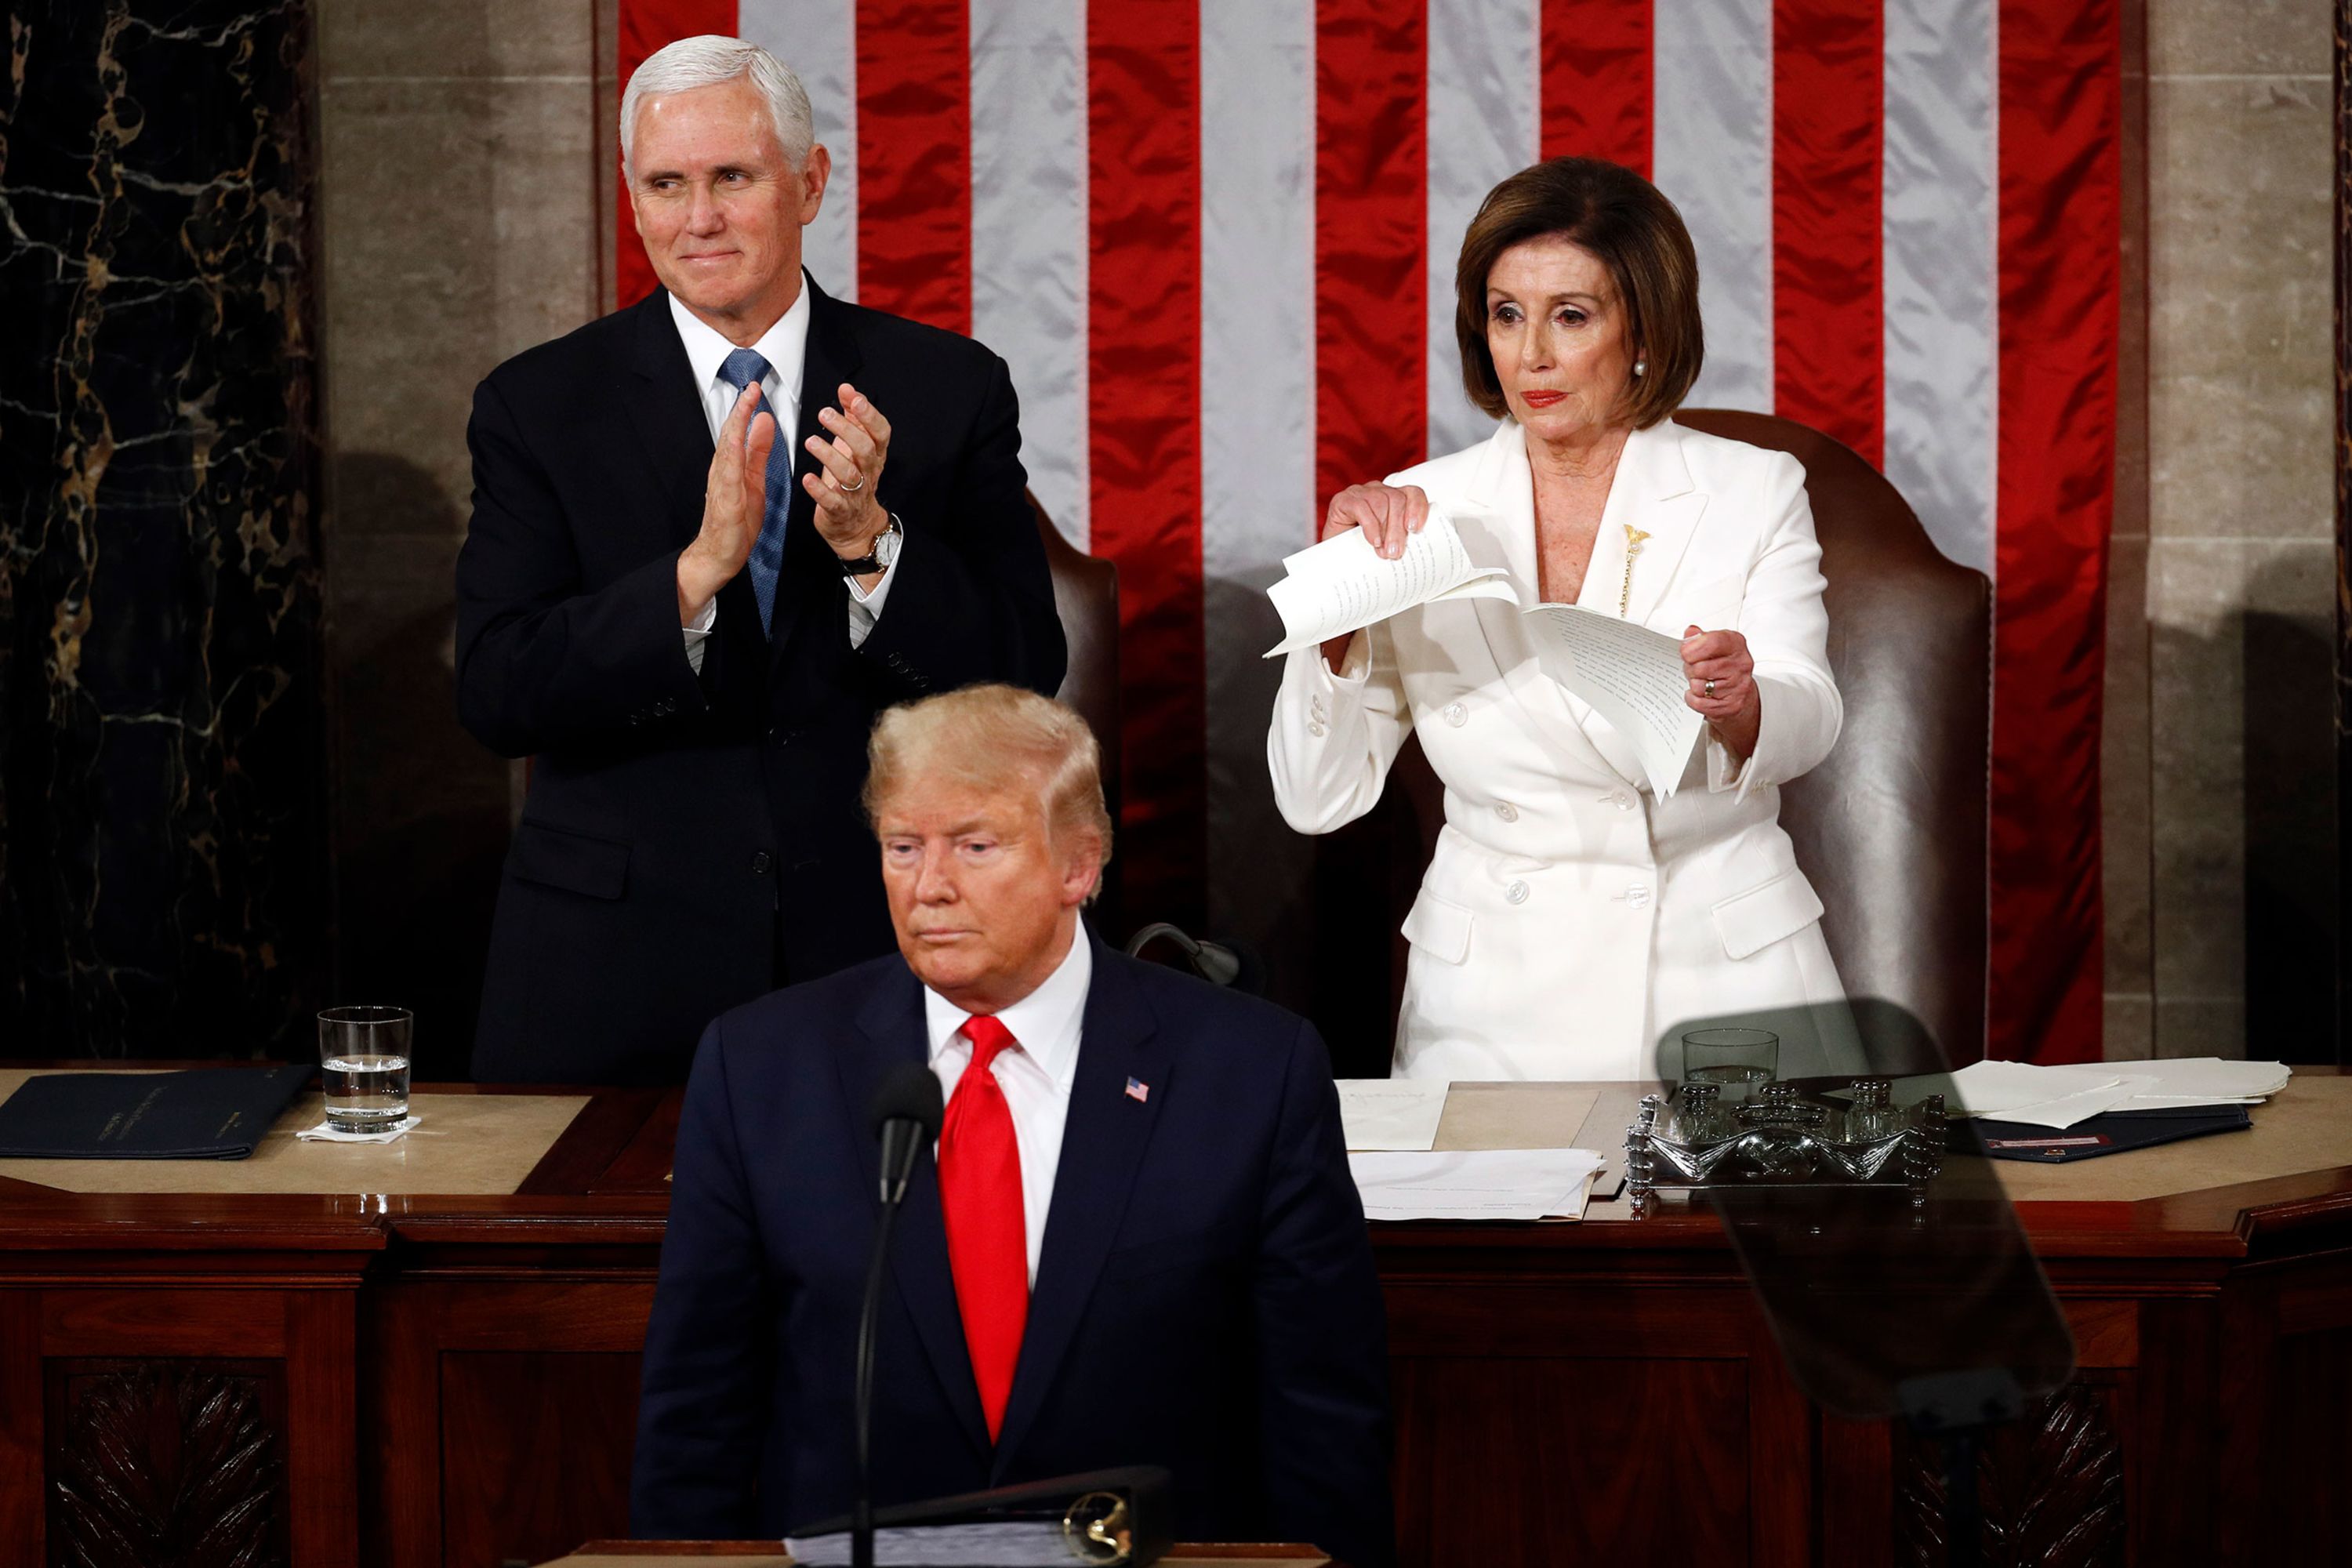 House Speaker Nancy Pelosi rips up her copy of President Donald Trump's State of the Union speech after he finished on Tuesday, February 4.